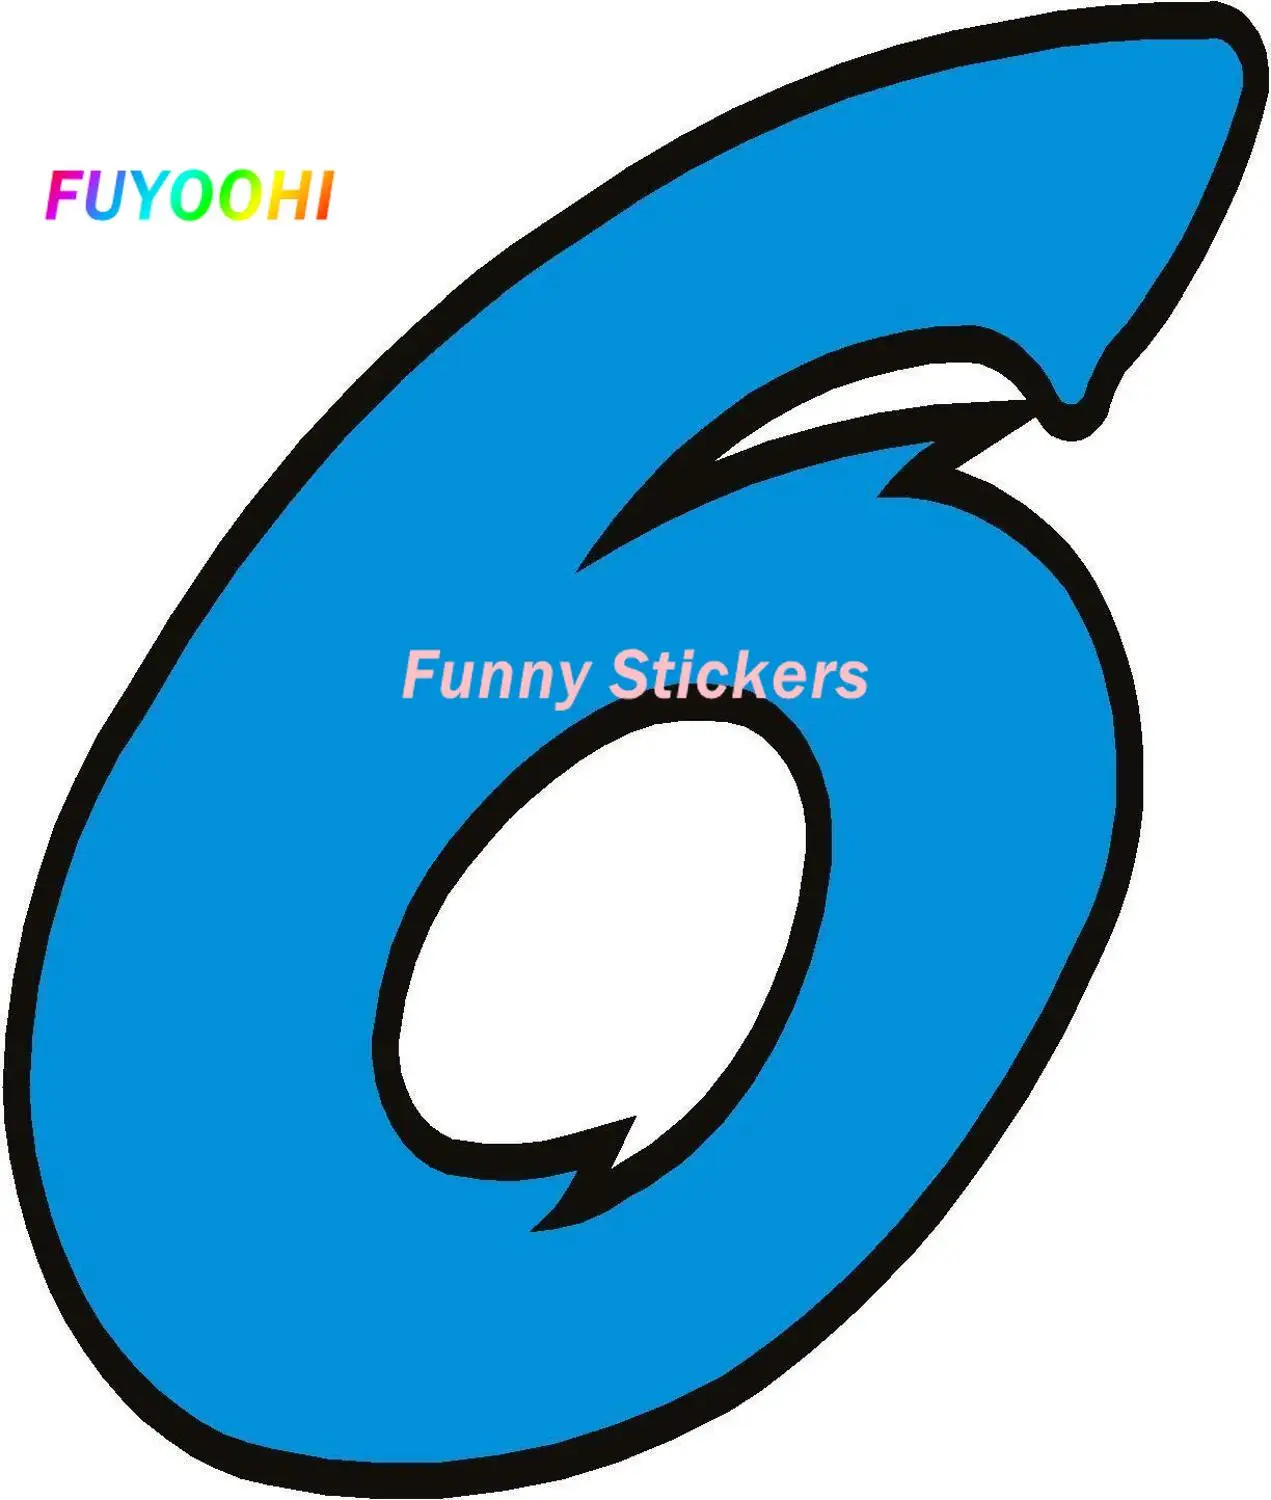 

FUYOOHI Play Stickers Dark Blue Race Numbers with Black Border Vinyl Decals Graphic Number PVC Waterproof Car Sticker